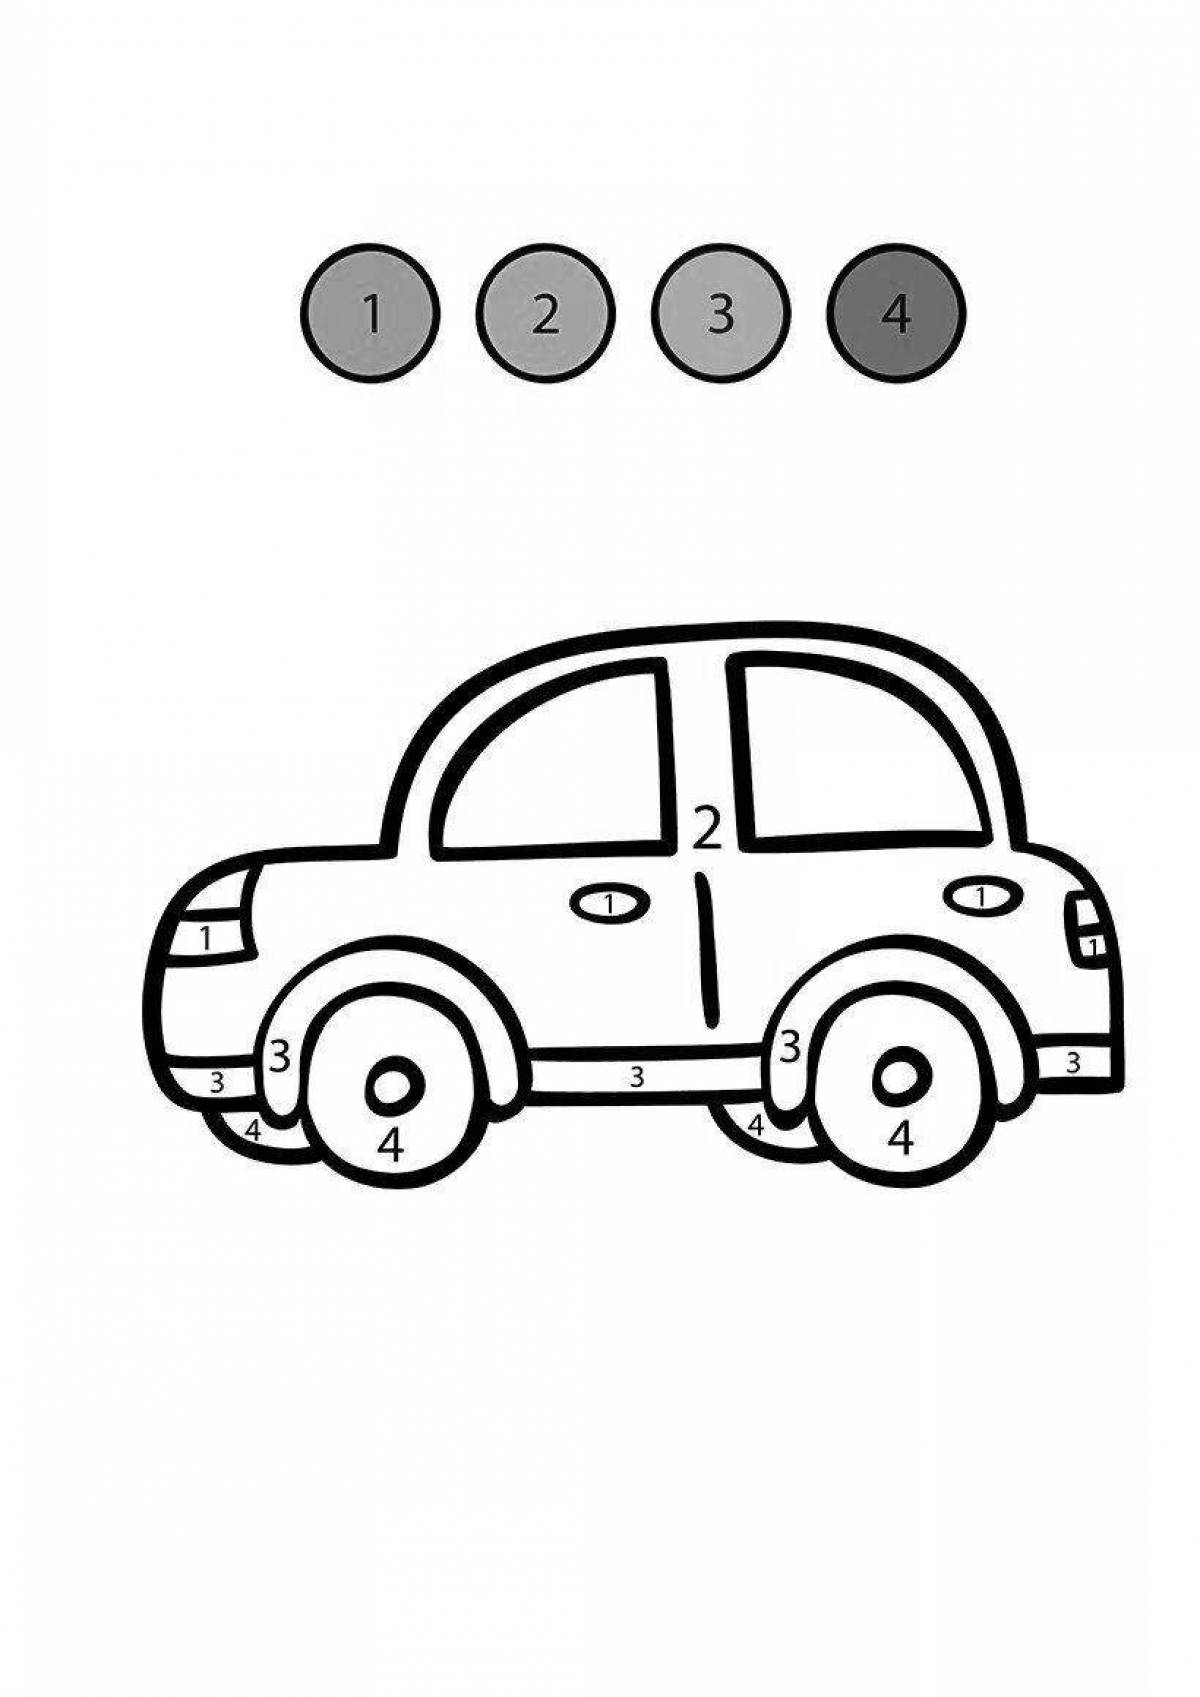 Awesome car number coloring page for 5-6 year olds